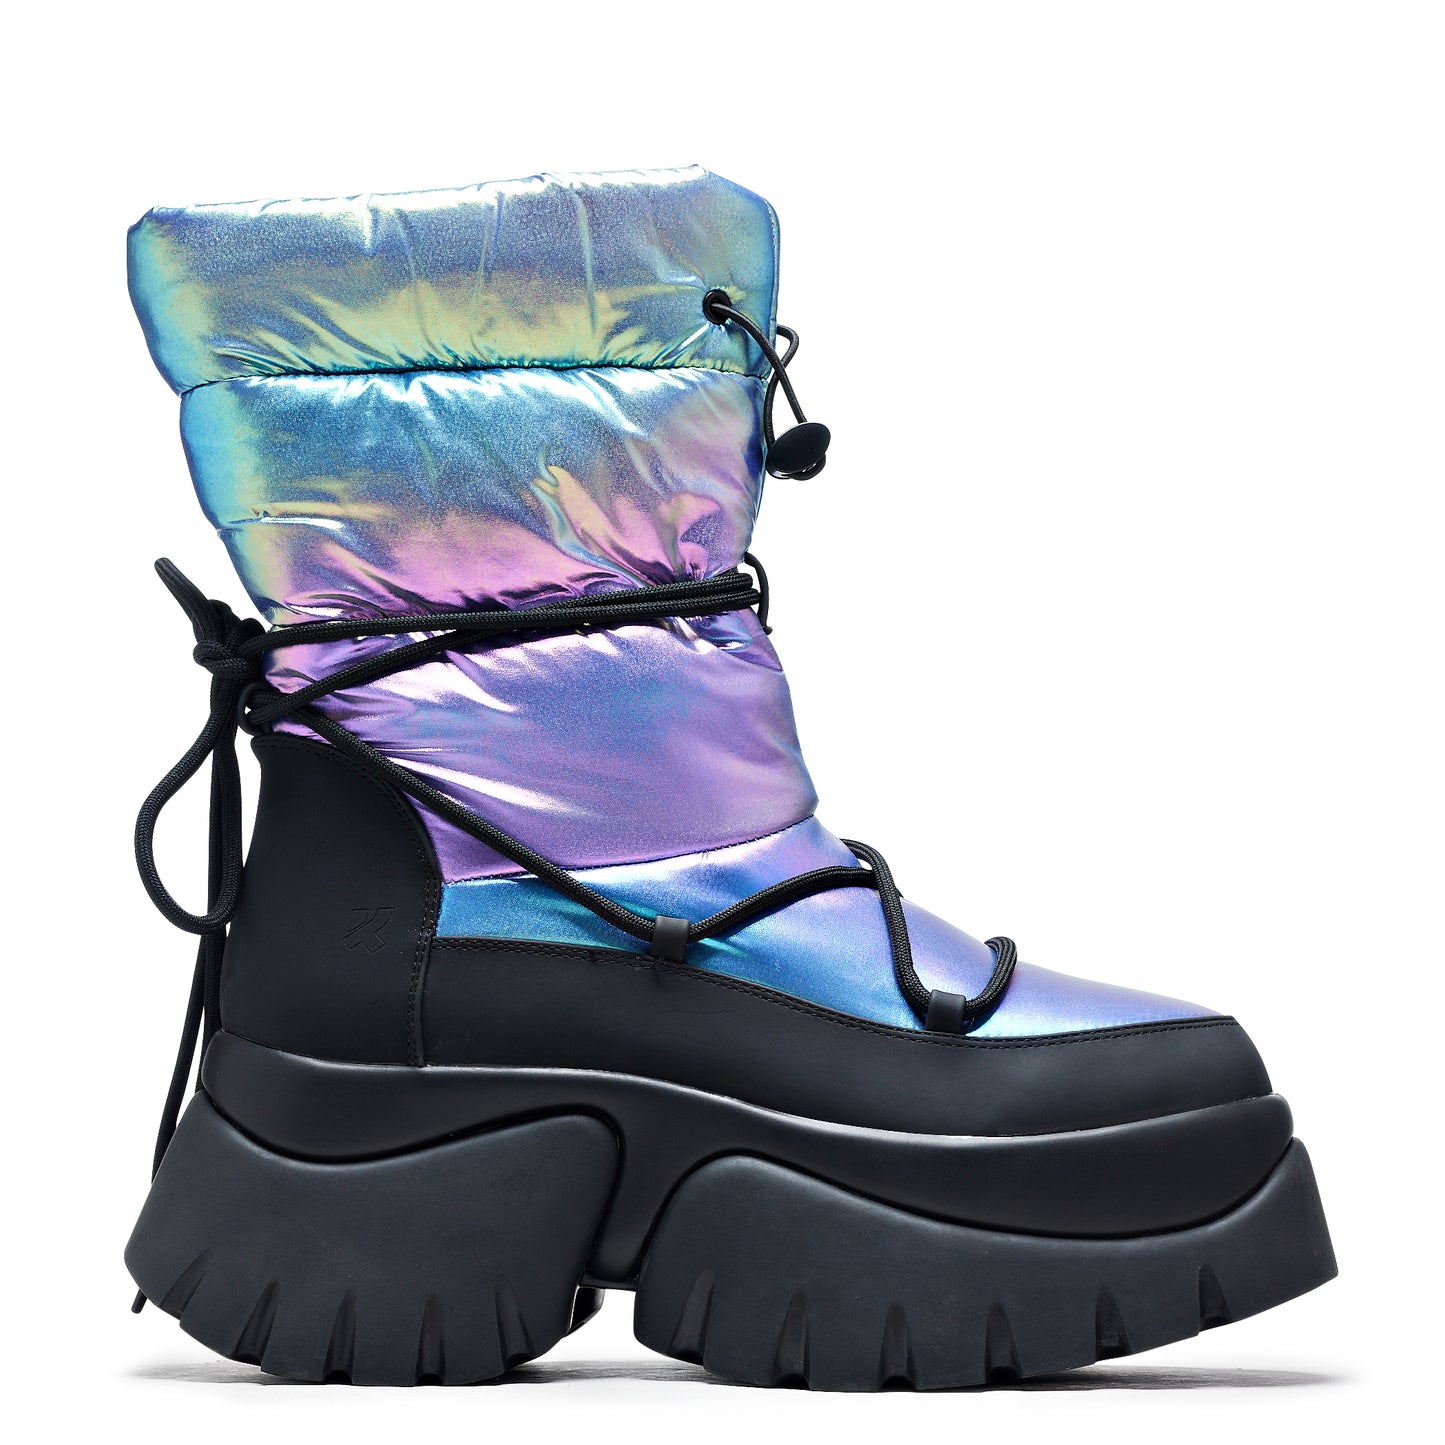 A Glass Mirage Snow Boots - Rainbow - Ankle Boots - KOI Footwear - Multi - Side View